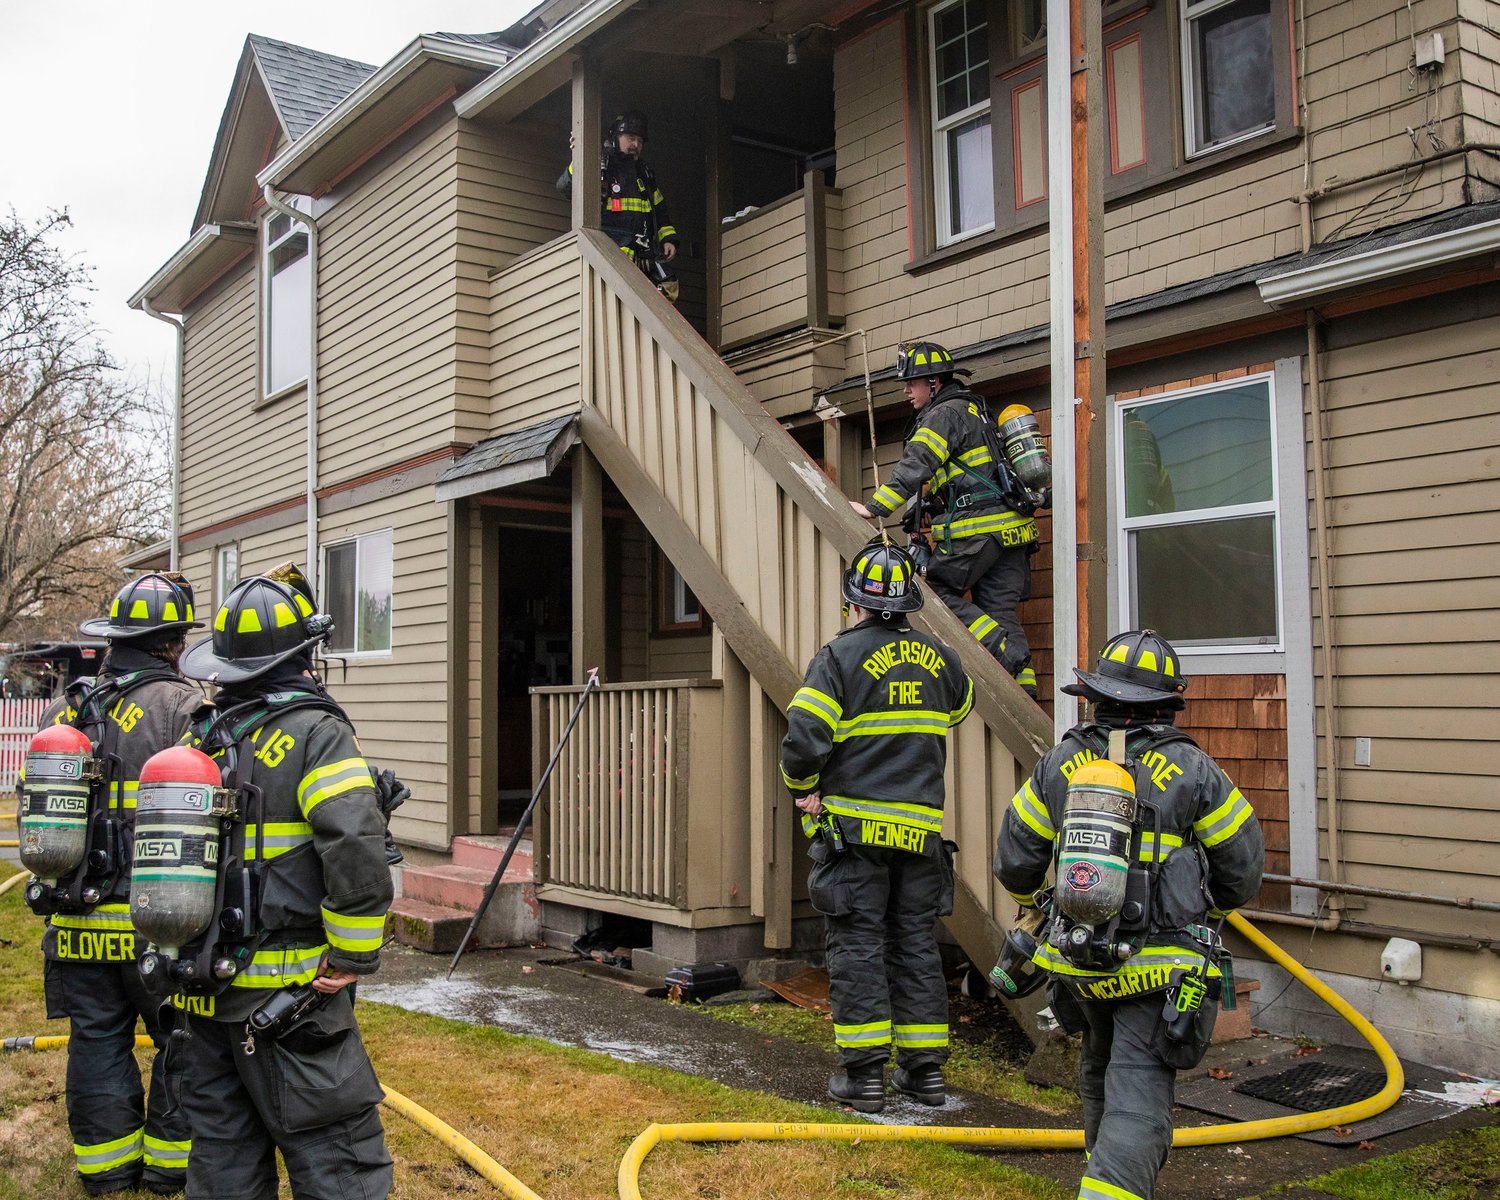 Riverside firefighters respond to the scene of a residential fire in the 200 block of North Rock Street in Centralia on Friday.